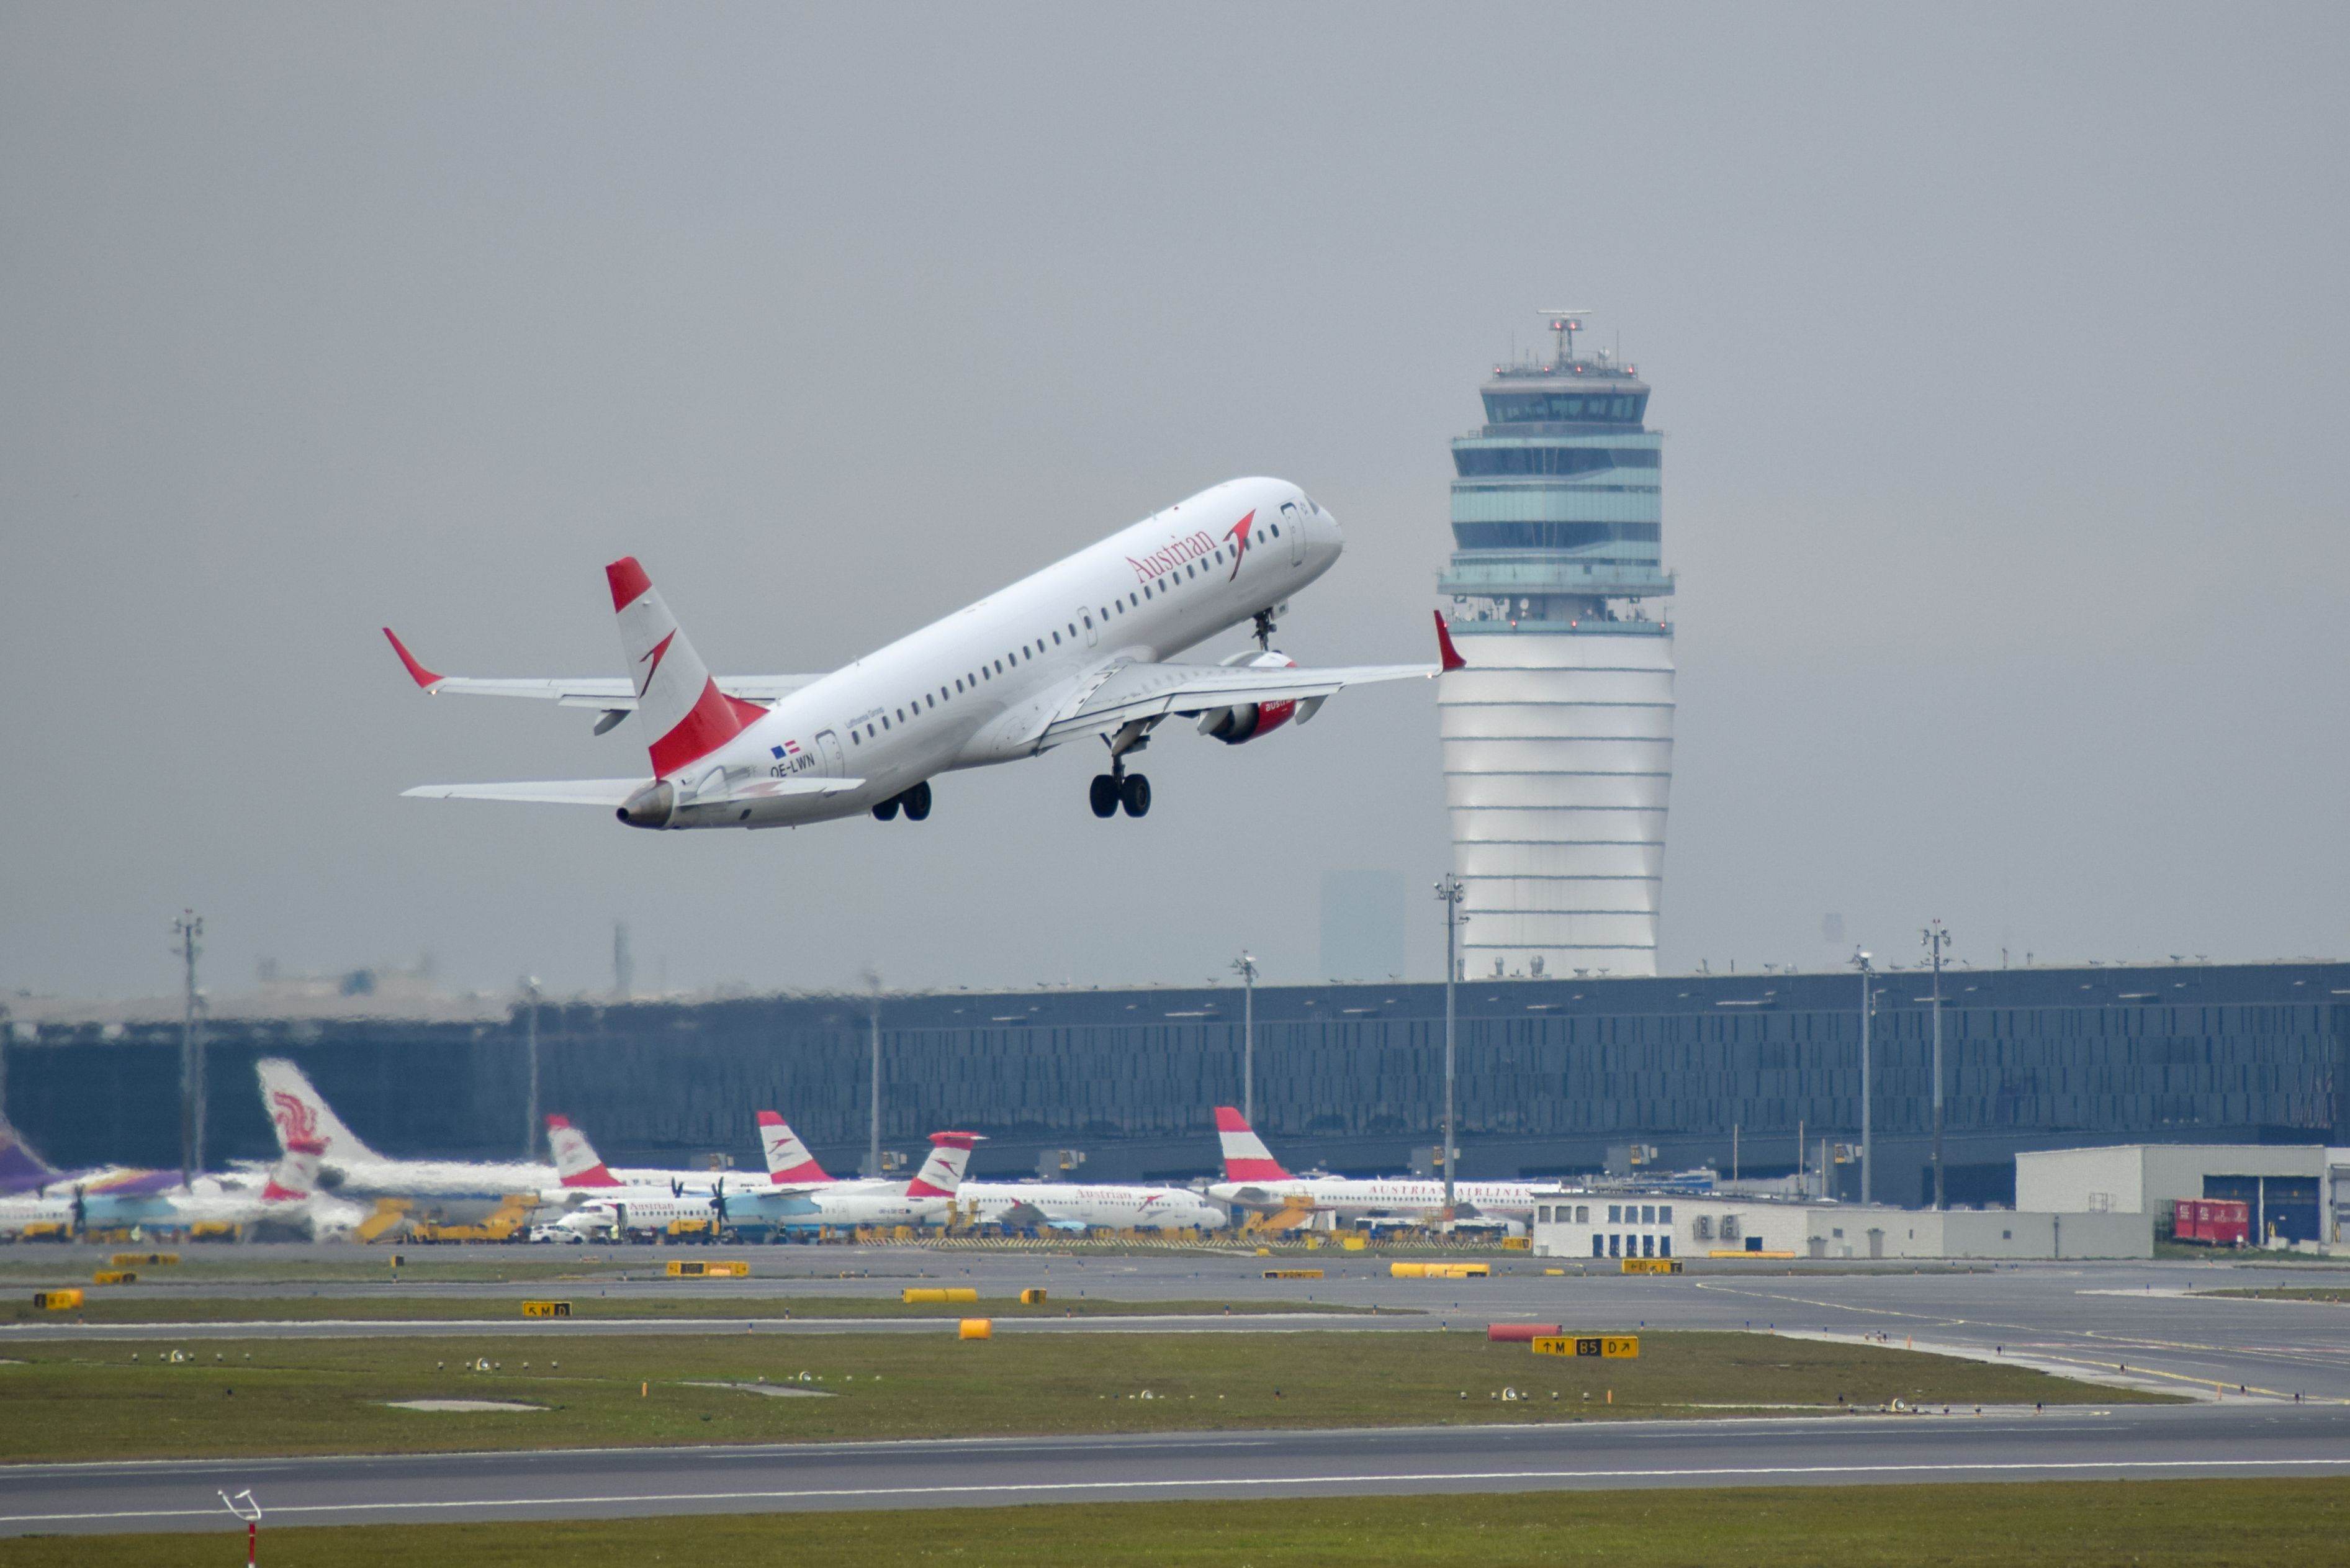 Austrian Airlines Airplane Crossing Vienna Airport ATC Tower